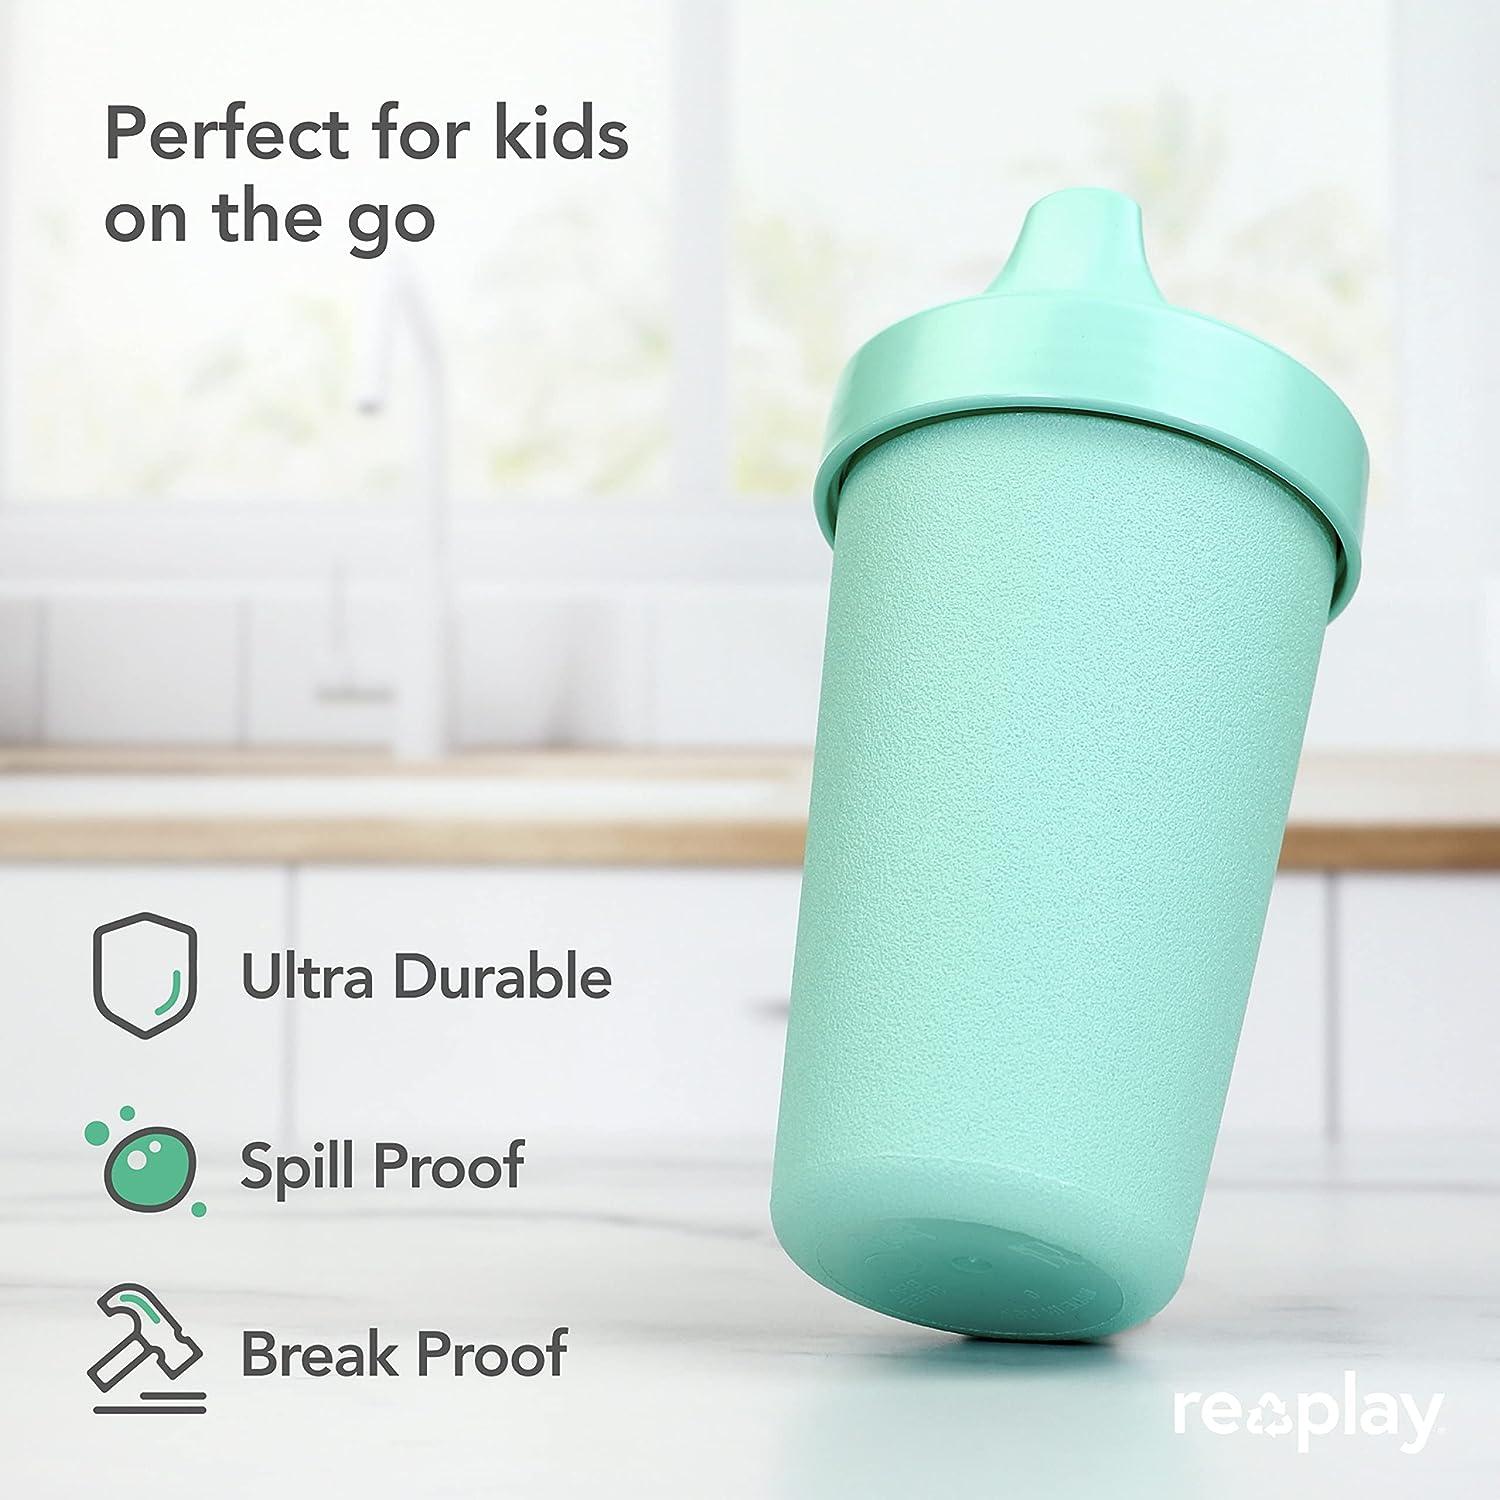 Re Play 4pk - 10 oz. No Spill Sippy Cups for Baby Toddler and Child Feeding  in Sky Blue Aqua Navy Blue and Teal - BPA Free - Made in USA from